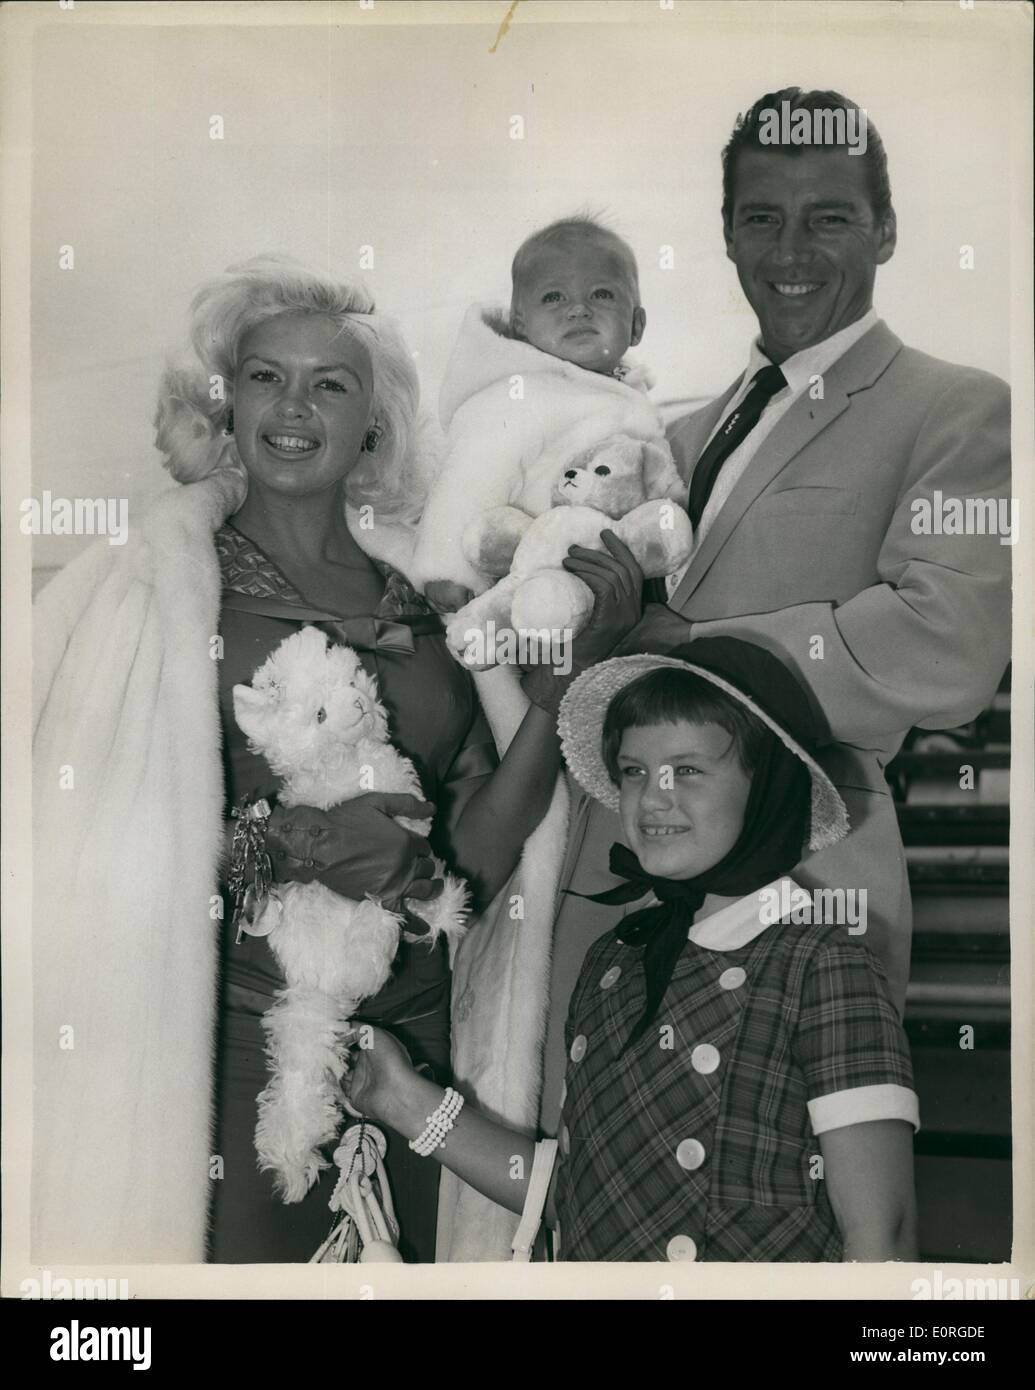 Jul. 07, 1959 - Jayne Mansfield Arrives: Jayne Mansfield, who is to start in a new British film, the Wigmoire Production ''Too Hot To Handle'', arrived at London Airport today with her husband, Mickey Hargitay and her nine-year old daughter, Jayne Marie, and baby son Niklas. Photo shows Jayne Mansfield with her husband and children on arrival at London Airport today. Stock Photo